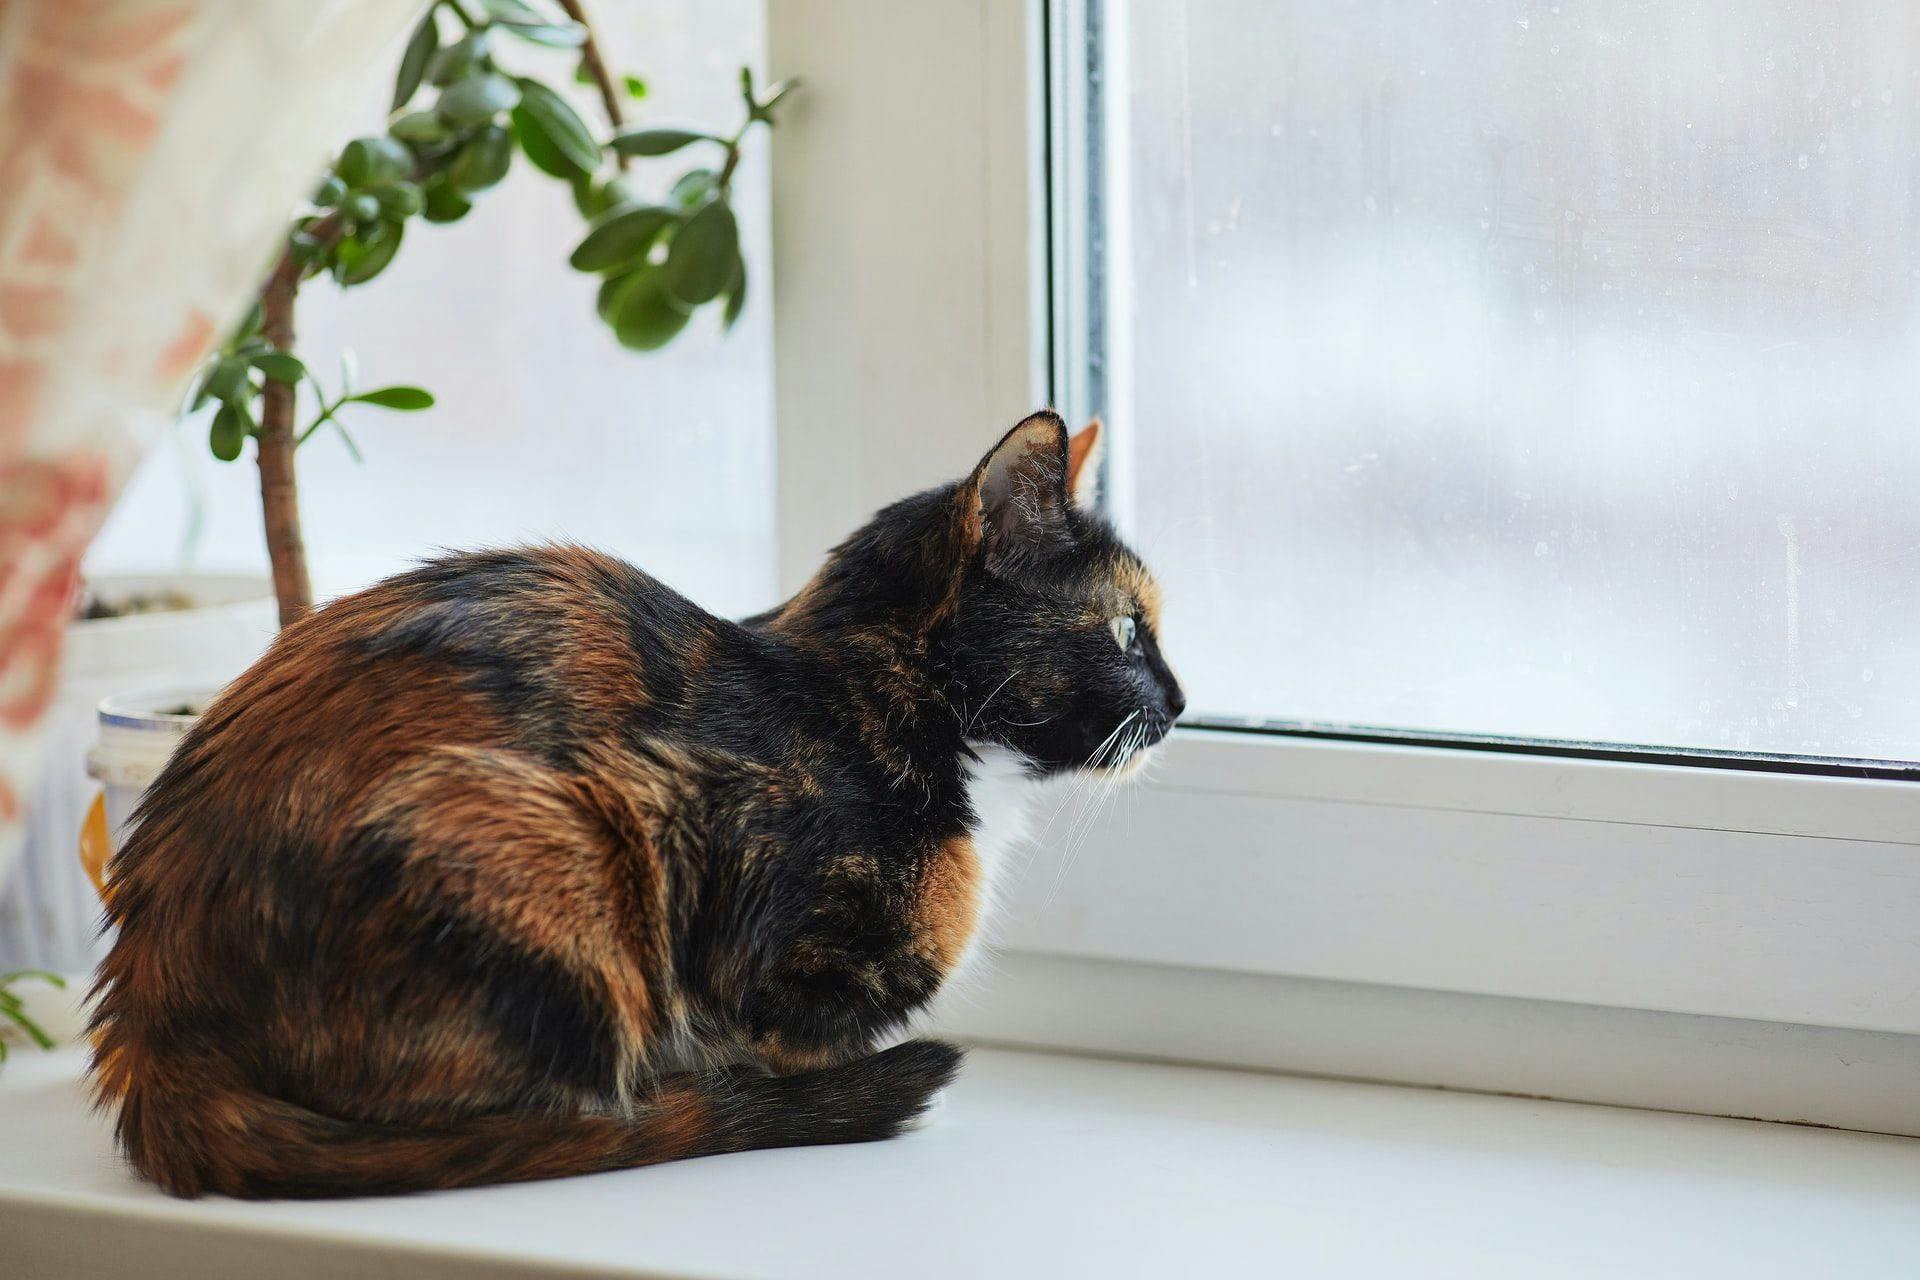 Tortoiseshell cat looking out window.